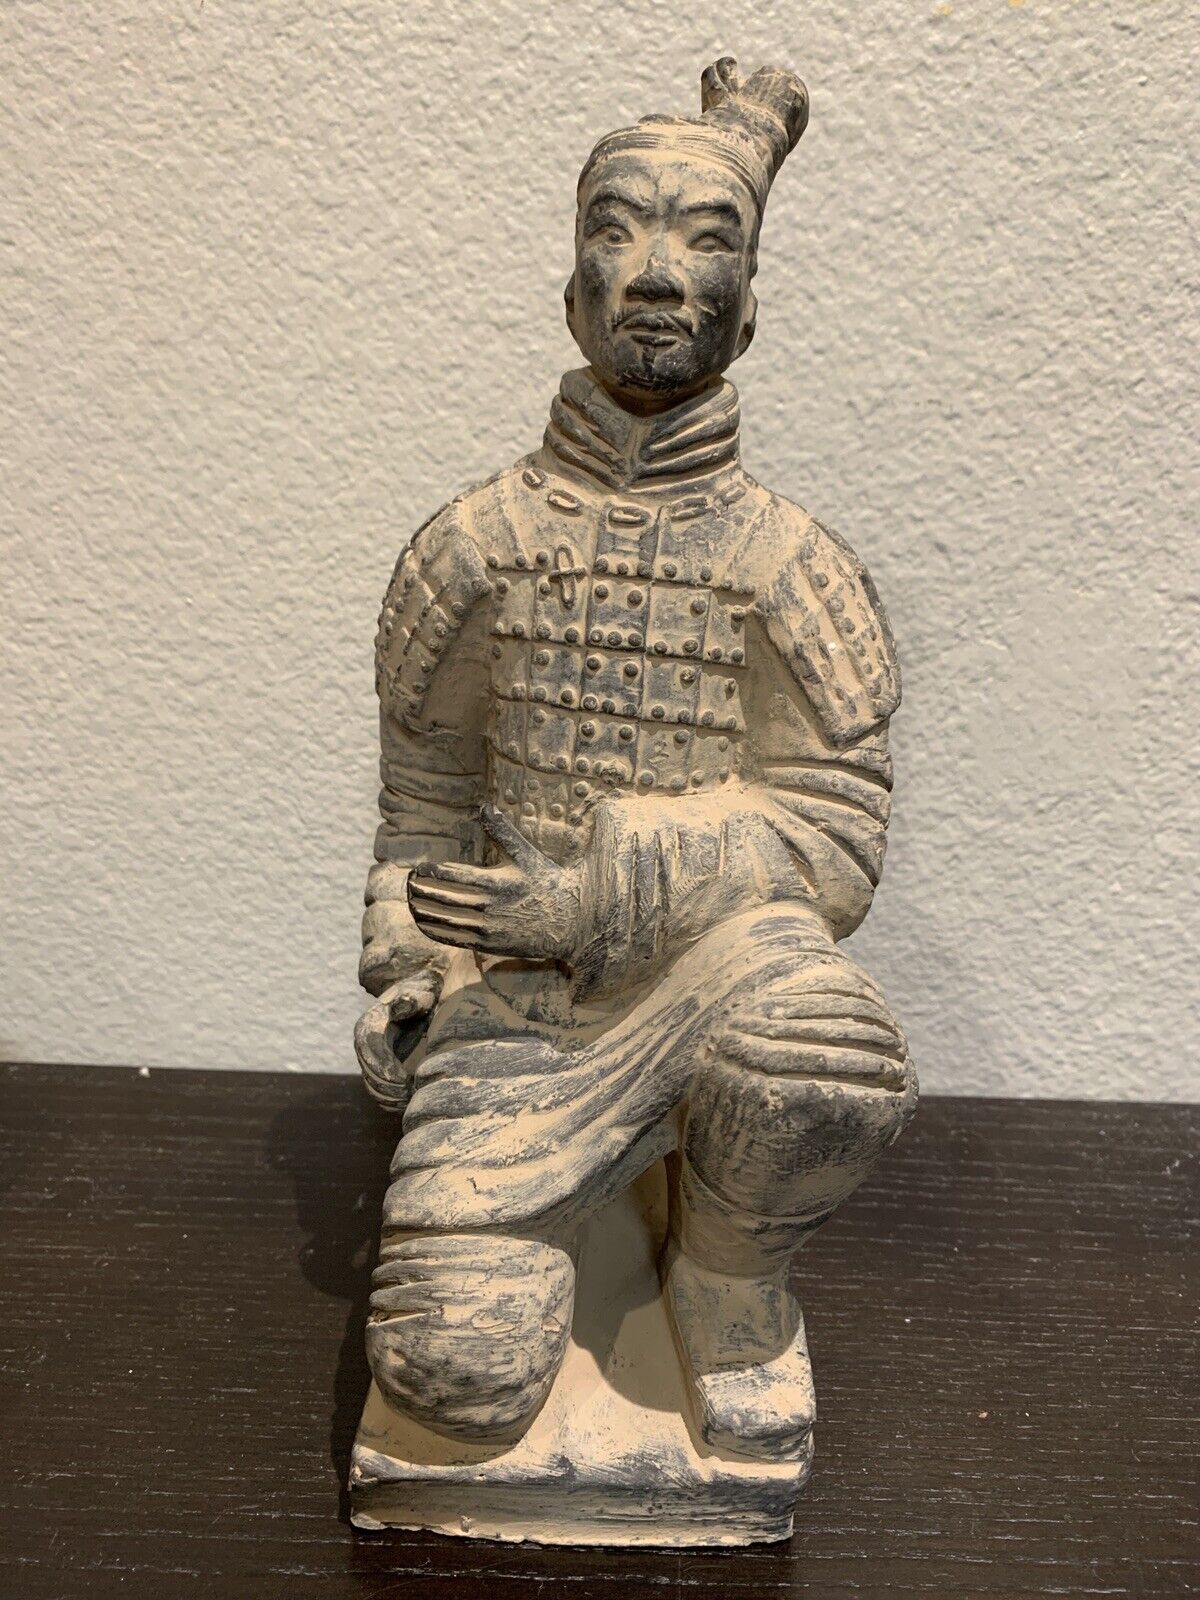 Antique Chinese Terra Cotta Qinshihuang Warrior - Authentic Replica